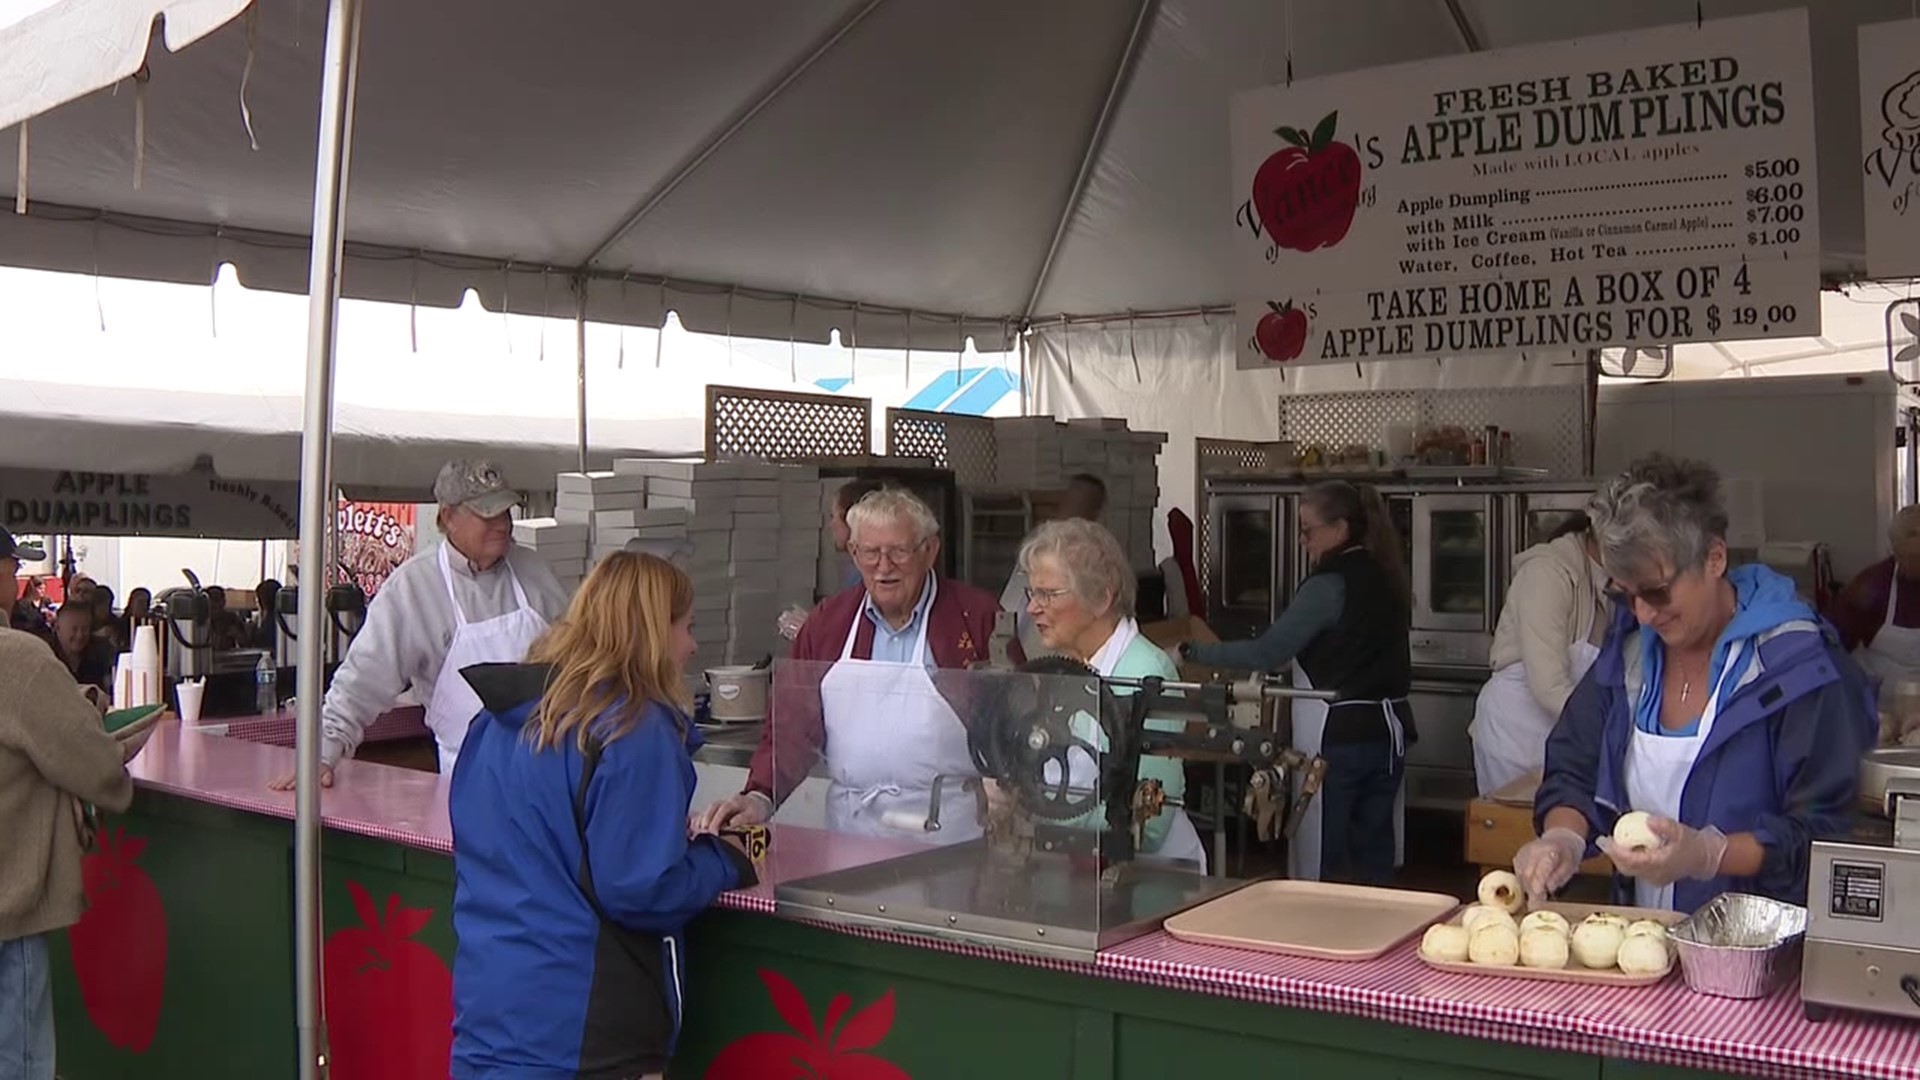 Newswatch 16's Nikki Krize spoke with some vendors who have been working the fair for years.